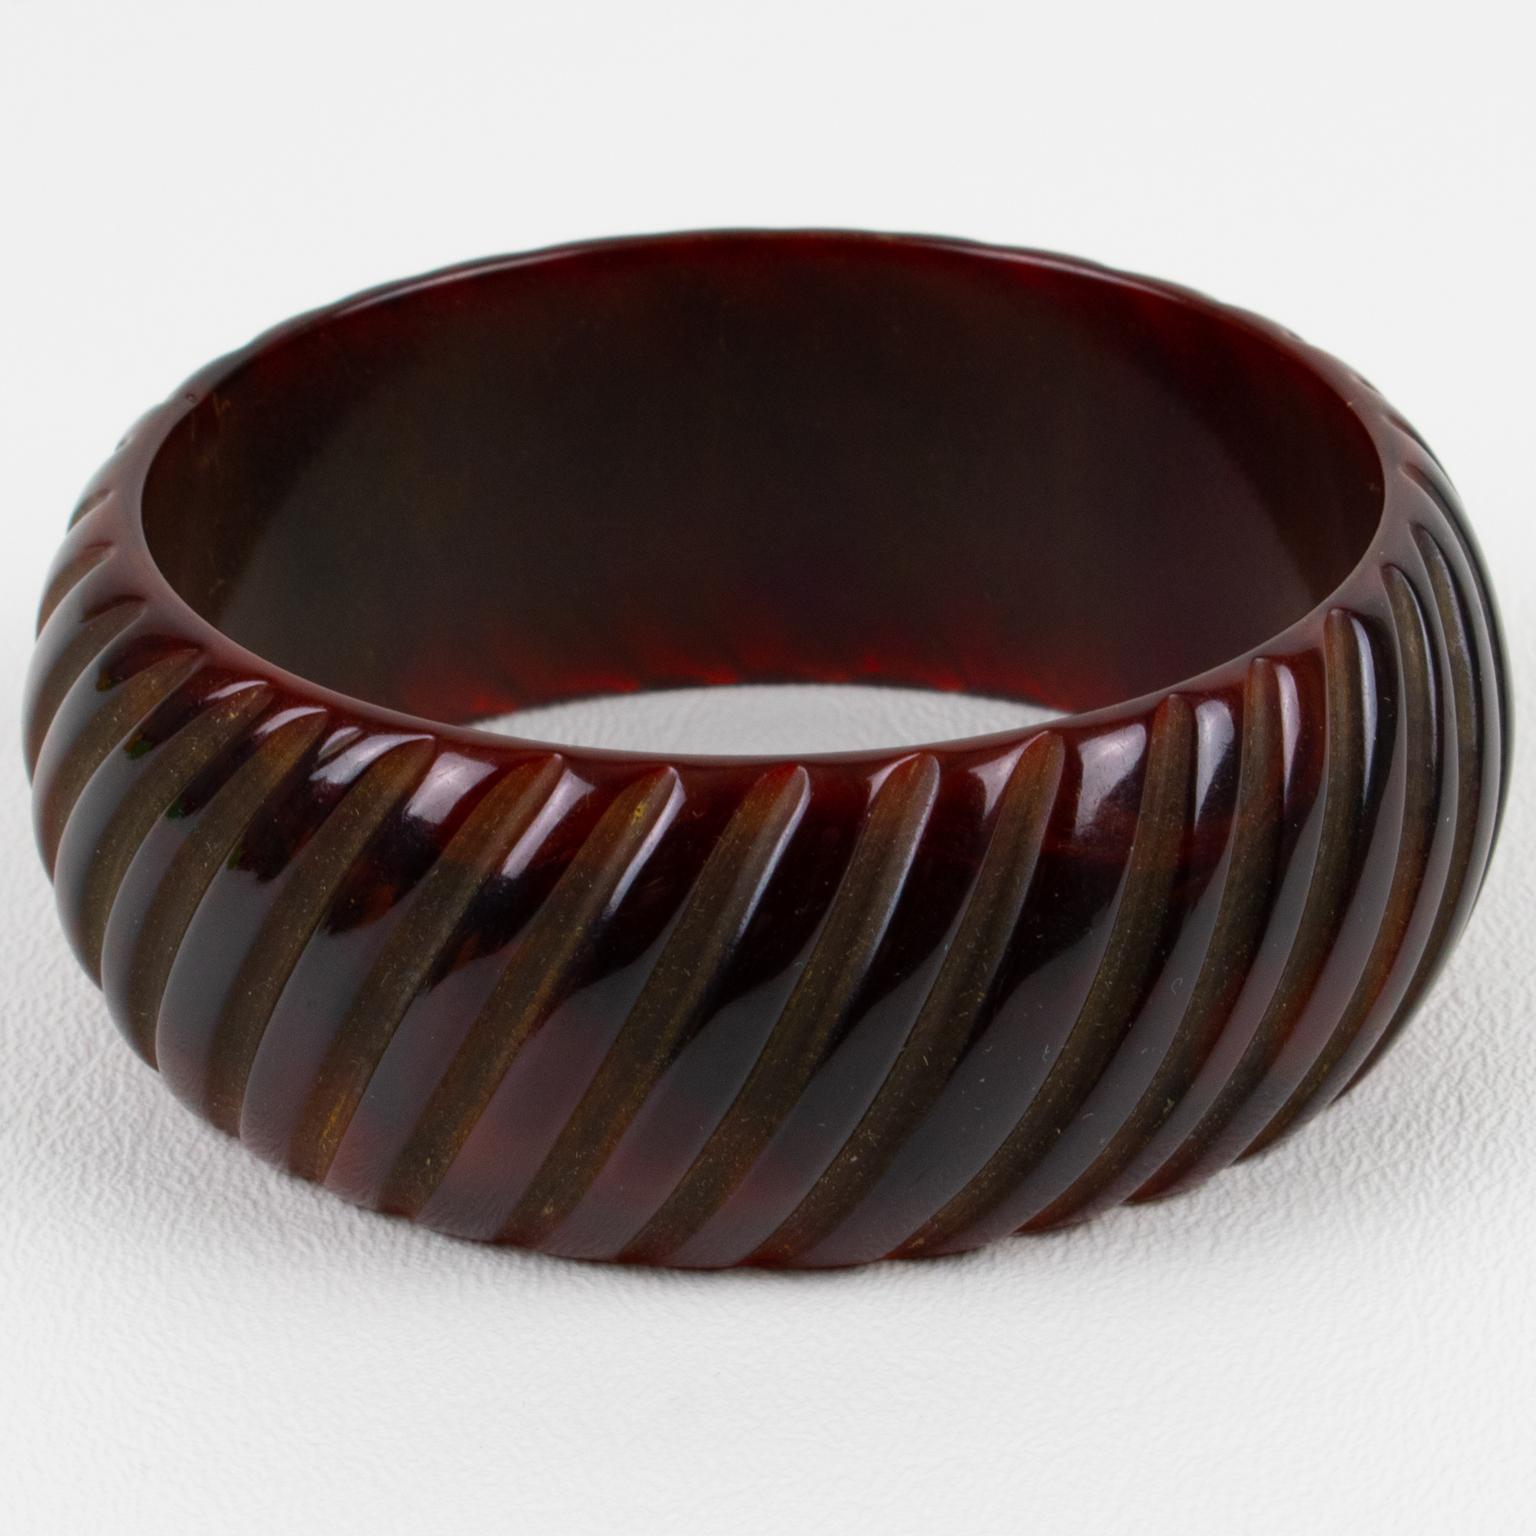 This is a fabulous red sangria Bakelite bracelet bangle. It features a chunky domed shape with geometric and deeply carved designs all around. The color is an intense dark red marble tone with a chocolate brown overtone. 
Measurements: Inside across